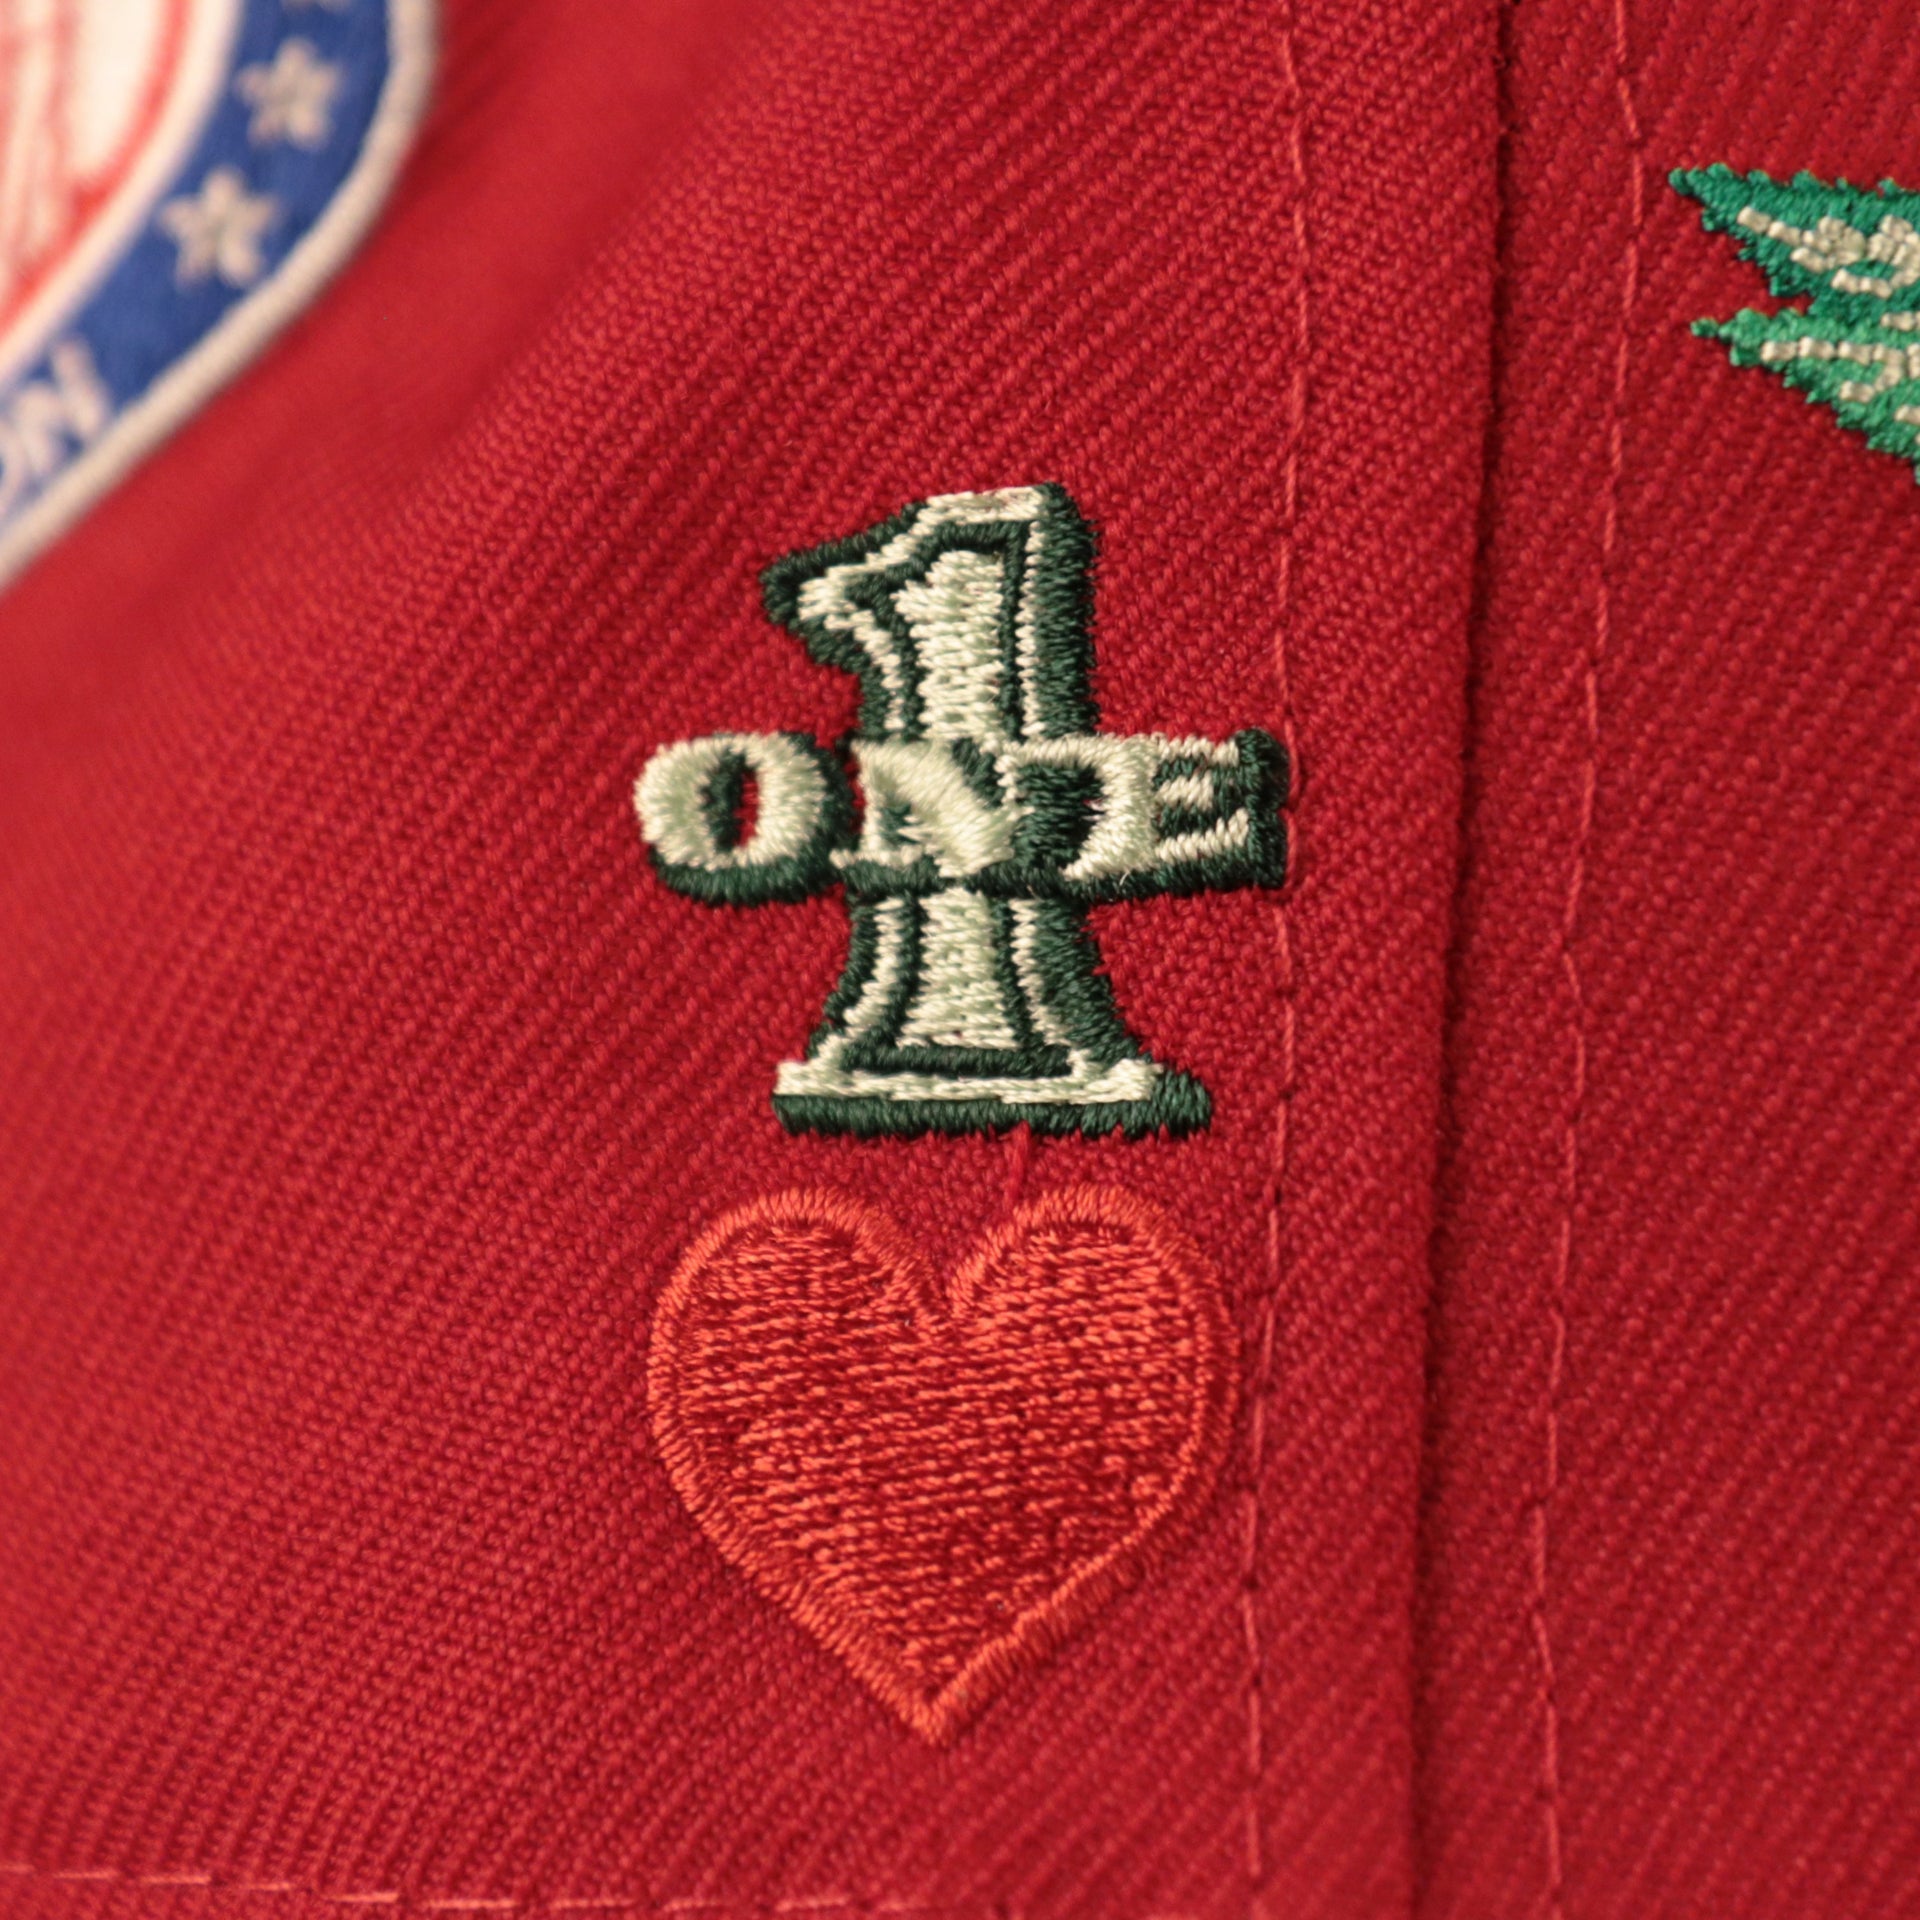 The number 1 patch on the right side of the red all over embroidered Philadelphia Phillies fitted cap.